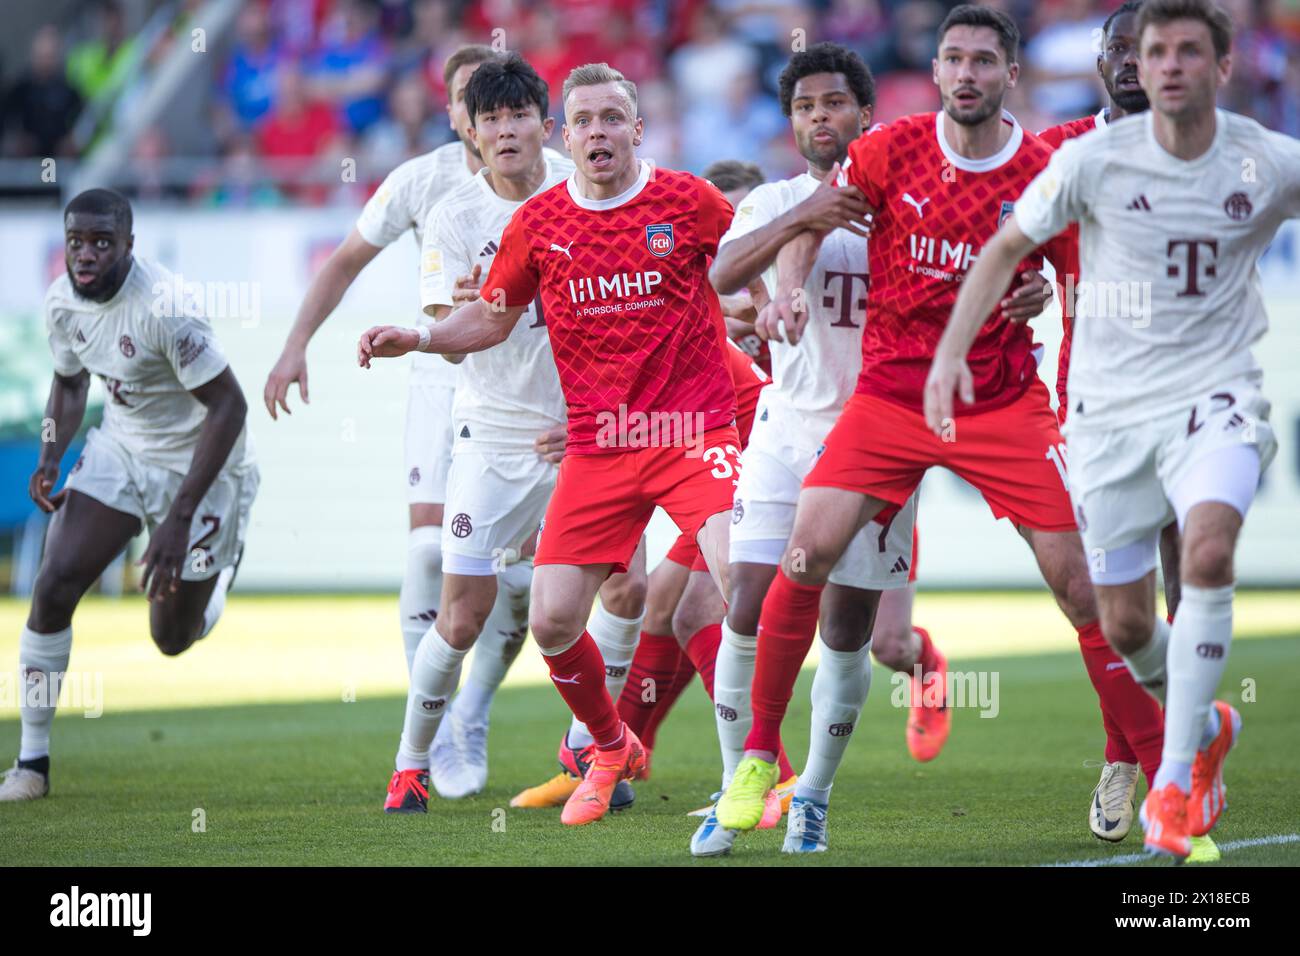 Football match, the players in the penalty area concentrating on the corner kick, from left to right Dayot UPAMECANO Bayern Munich, Minjae KIM Bayern Stock Photo